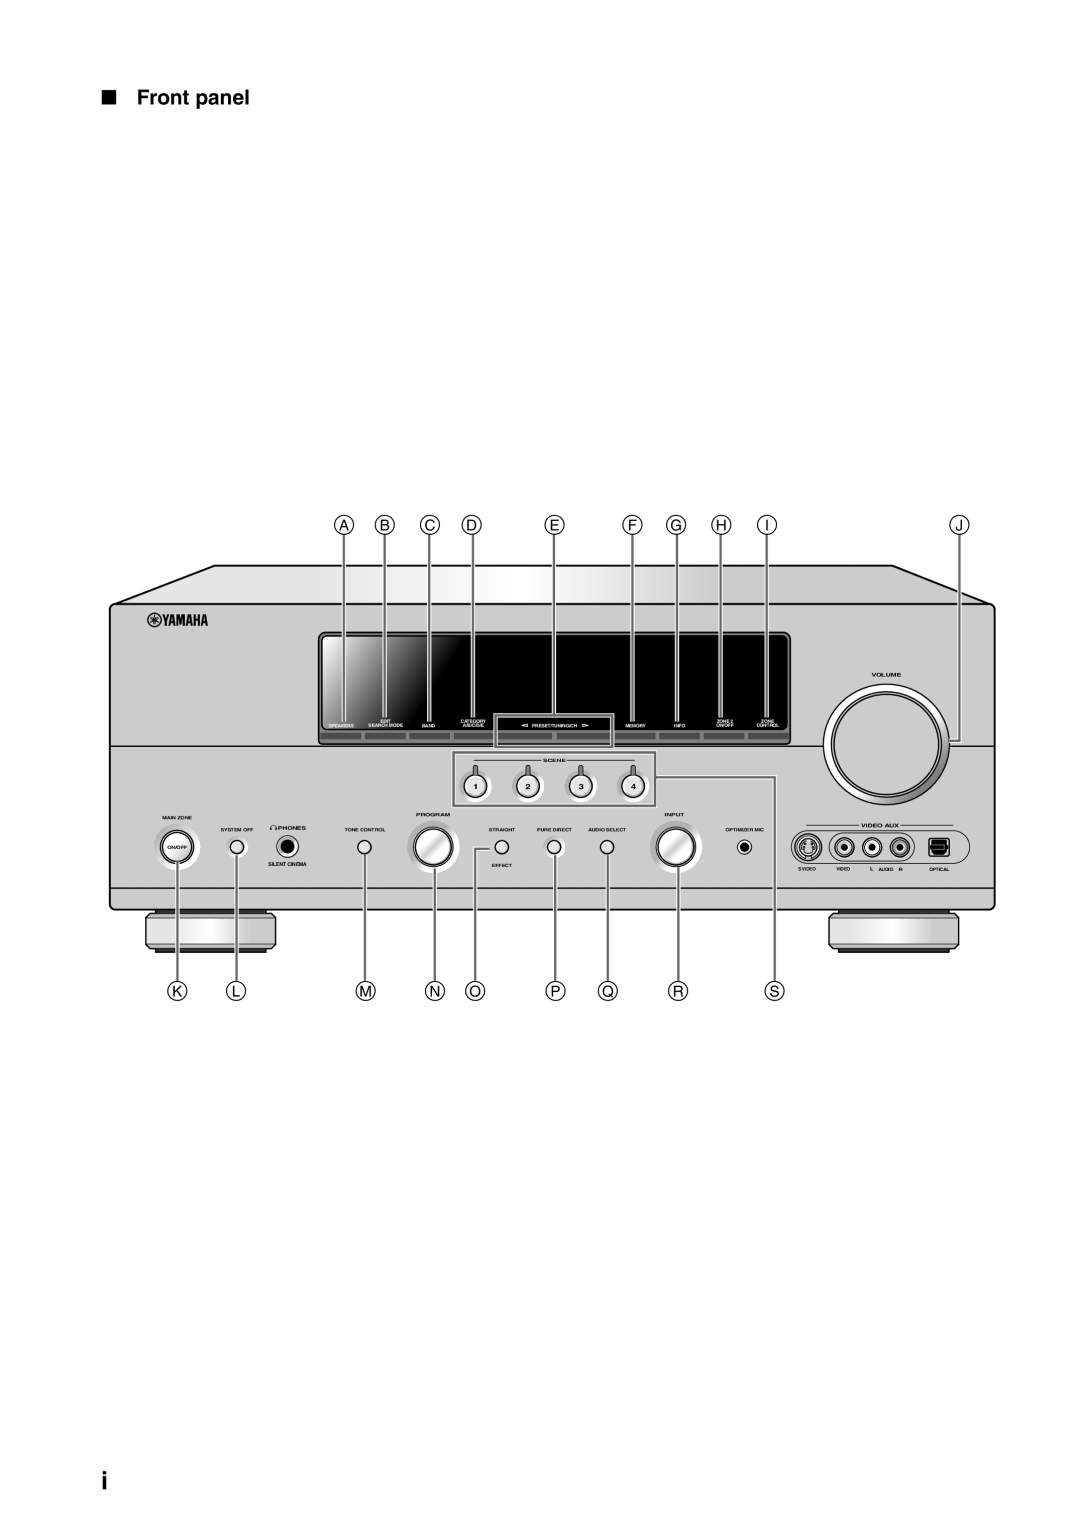 Yamaha HTR-6180 Front panel, A B C D E F G H I J, Edit, Speakers, Search Mode, Band, Category, Preset/Tuning/Ch, Zone 